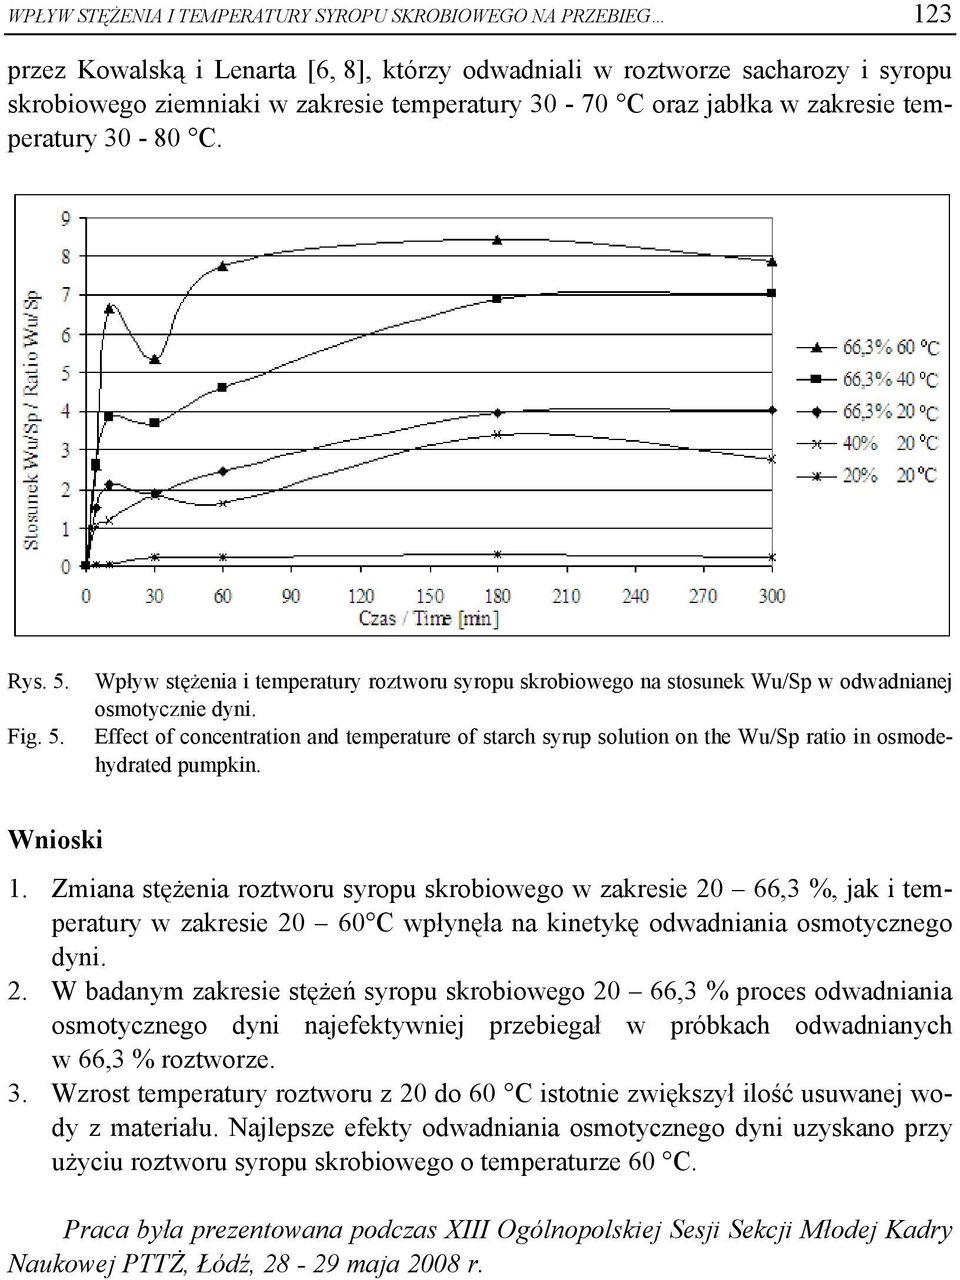 Effect of concentration and temperature of starch syrup solution on the Wu/Sp ratio in osmodehydrated pumpkin. Wnioski 1.